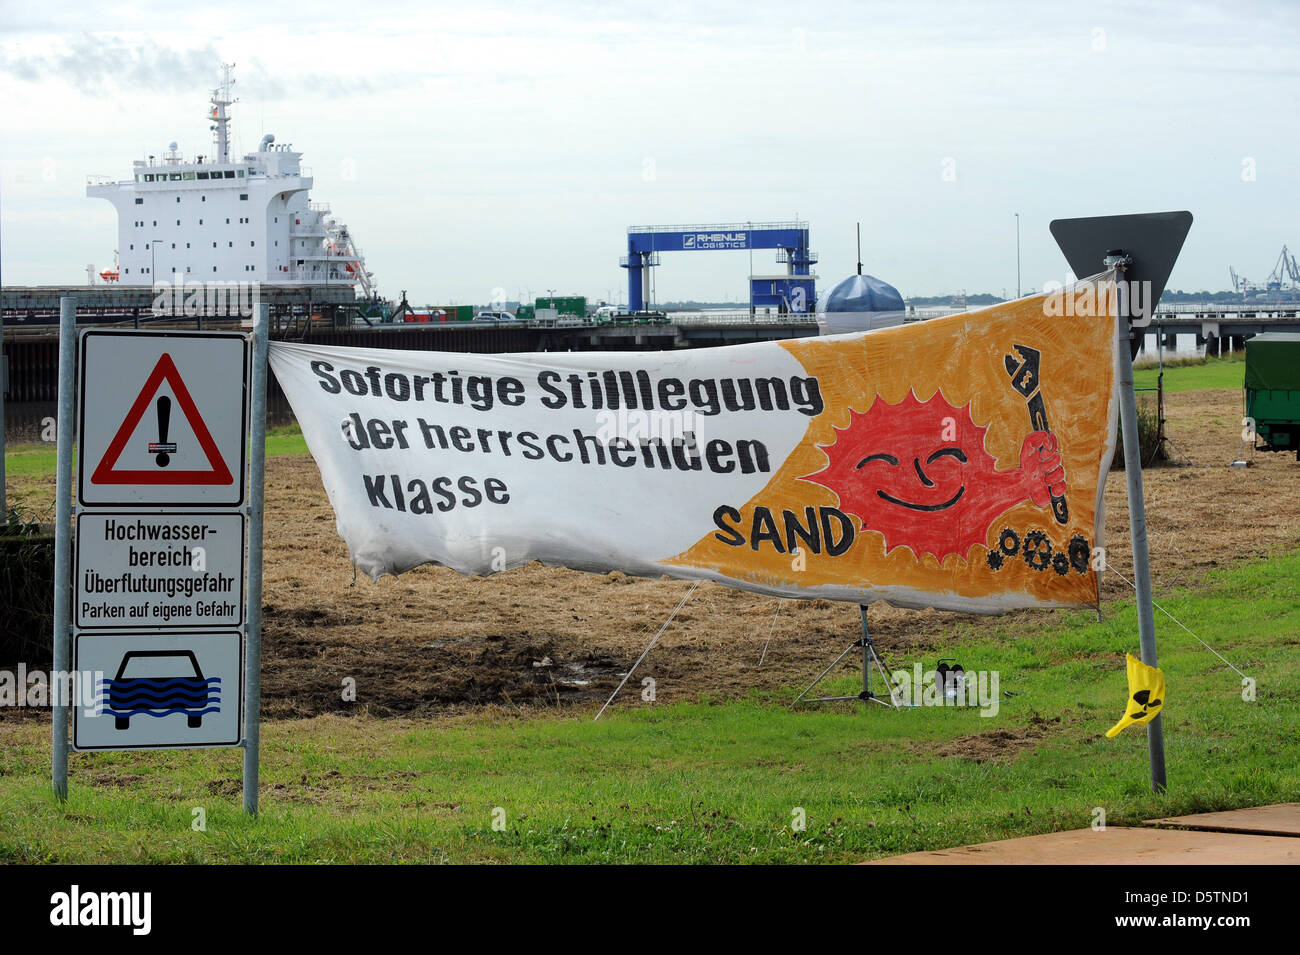 An anti-nuclear banner is set up in front of the RoRo landing pier in Nordenham, Germany, 23 September 2012. Members of the Anti-nuclear movement contrAtom have called for a protest against the transport of MOKS elements through German ports. The fuel elements are currently on their way on the Weser river from British Sellafield to Nordenham. Photo: Ingo Wagner Stock Photo